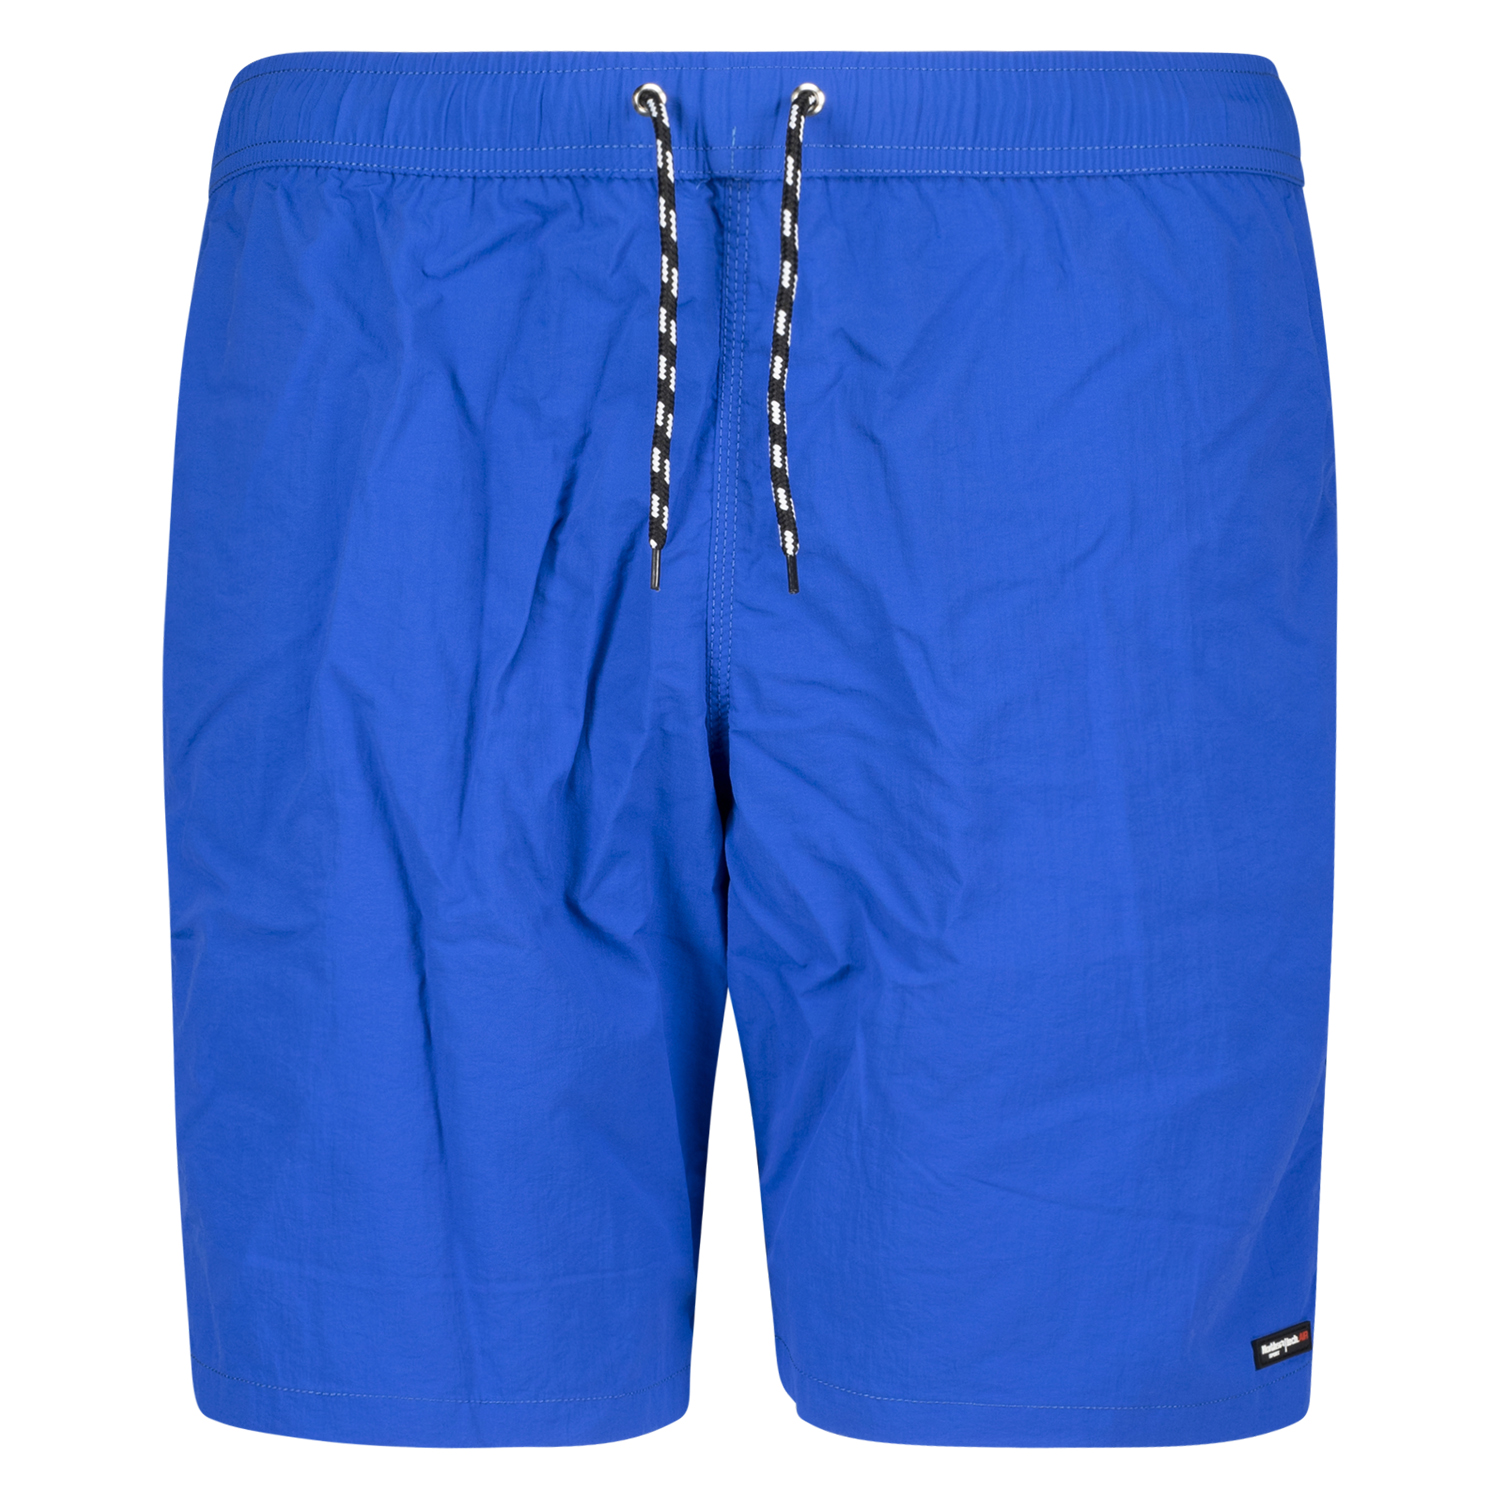 Swimshort by aero/North 56°4 - royal blue- 2XL sizes up to 8XL